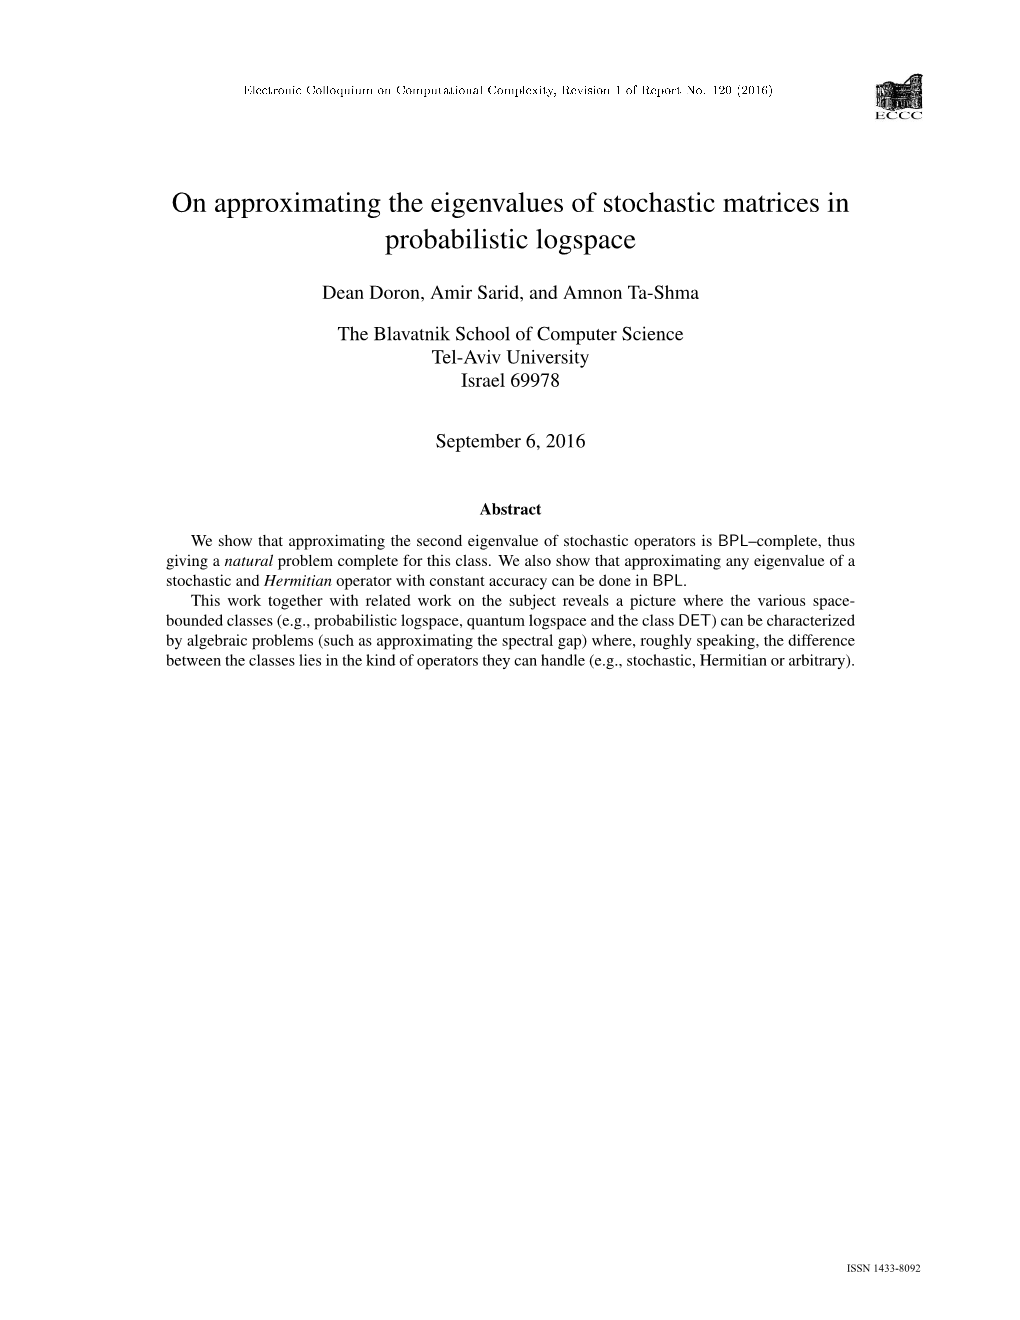 On Approximating the Eigenvalues of Stochastic Matrices in Probabilistic Logspace